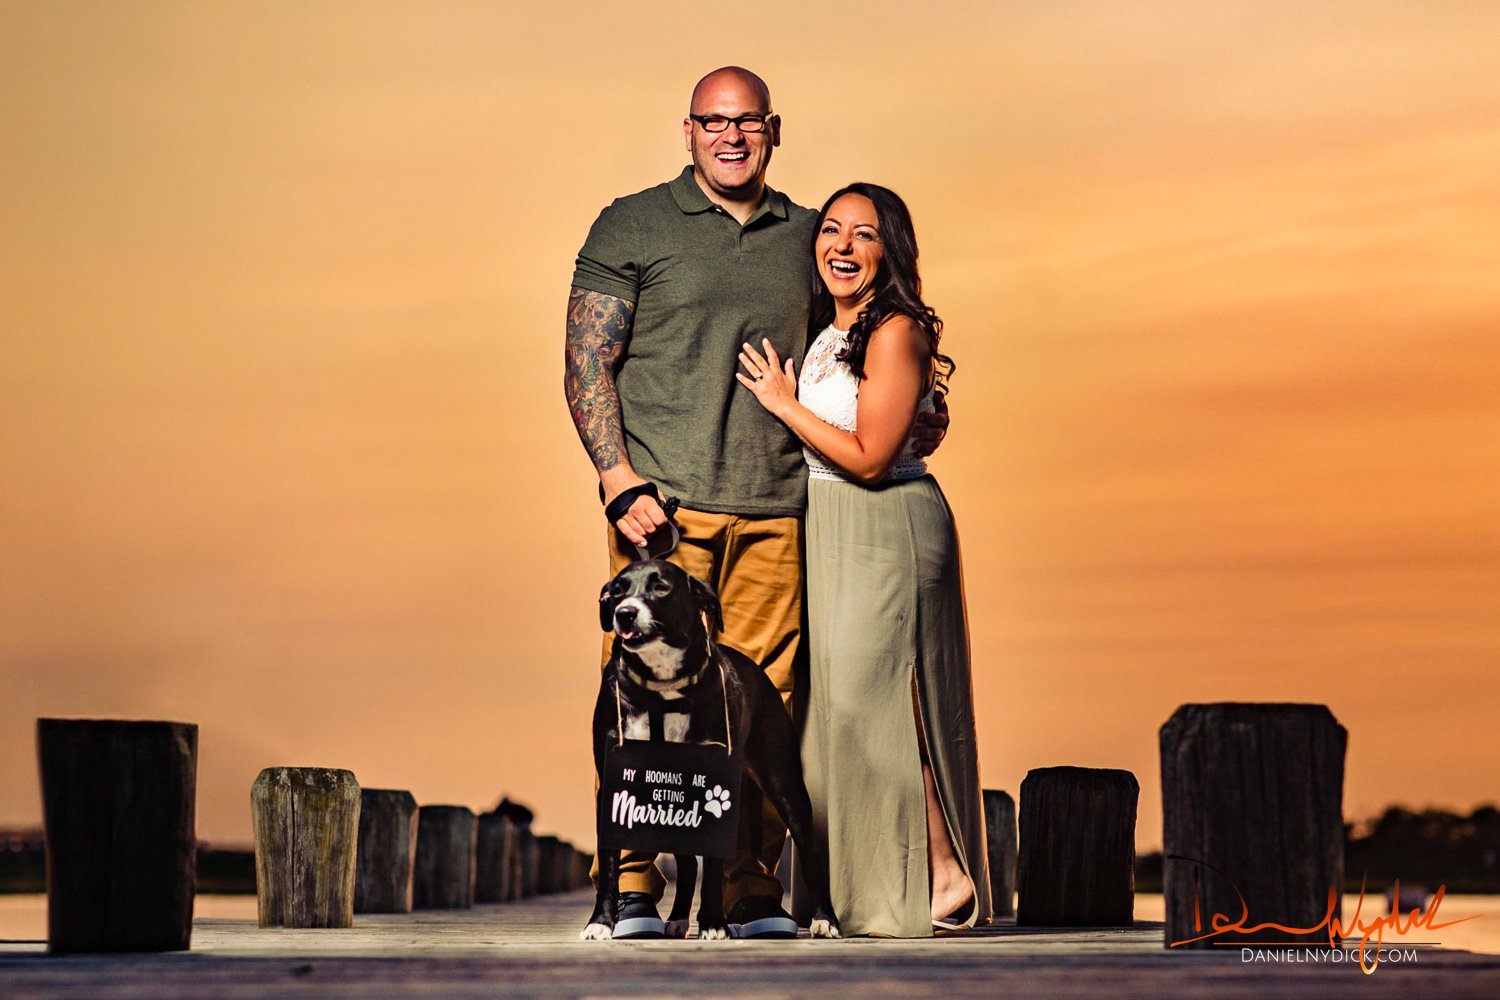 Veronica & Adam Engagment Session 7-8-2019 © Daniel Nydick Photography.CR2 (7 of 36).jpg